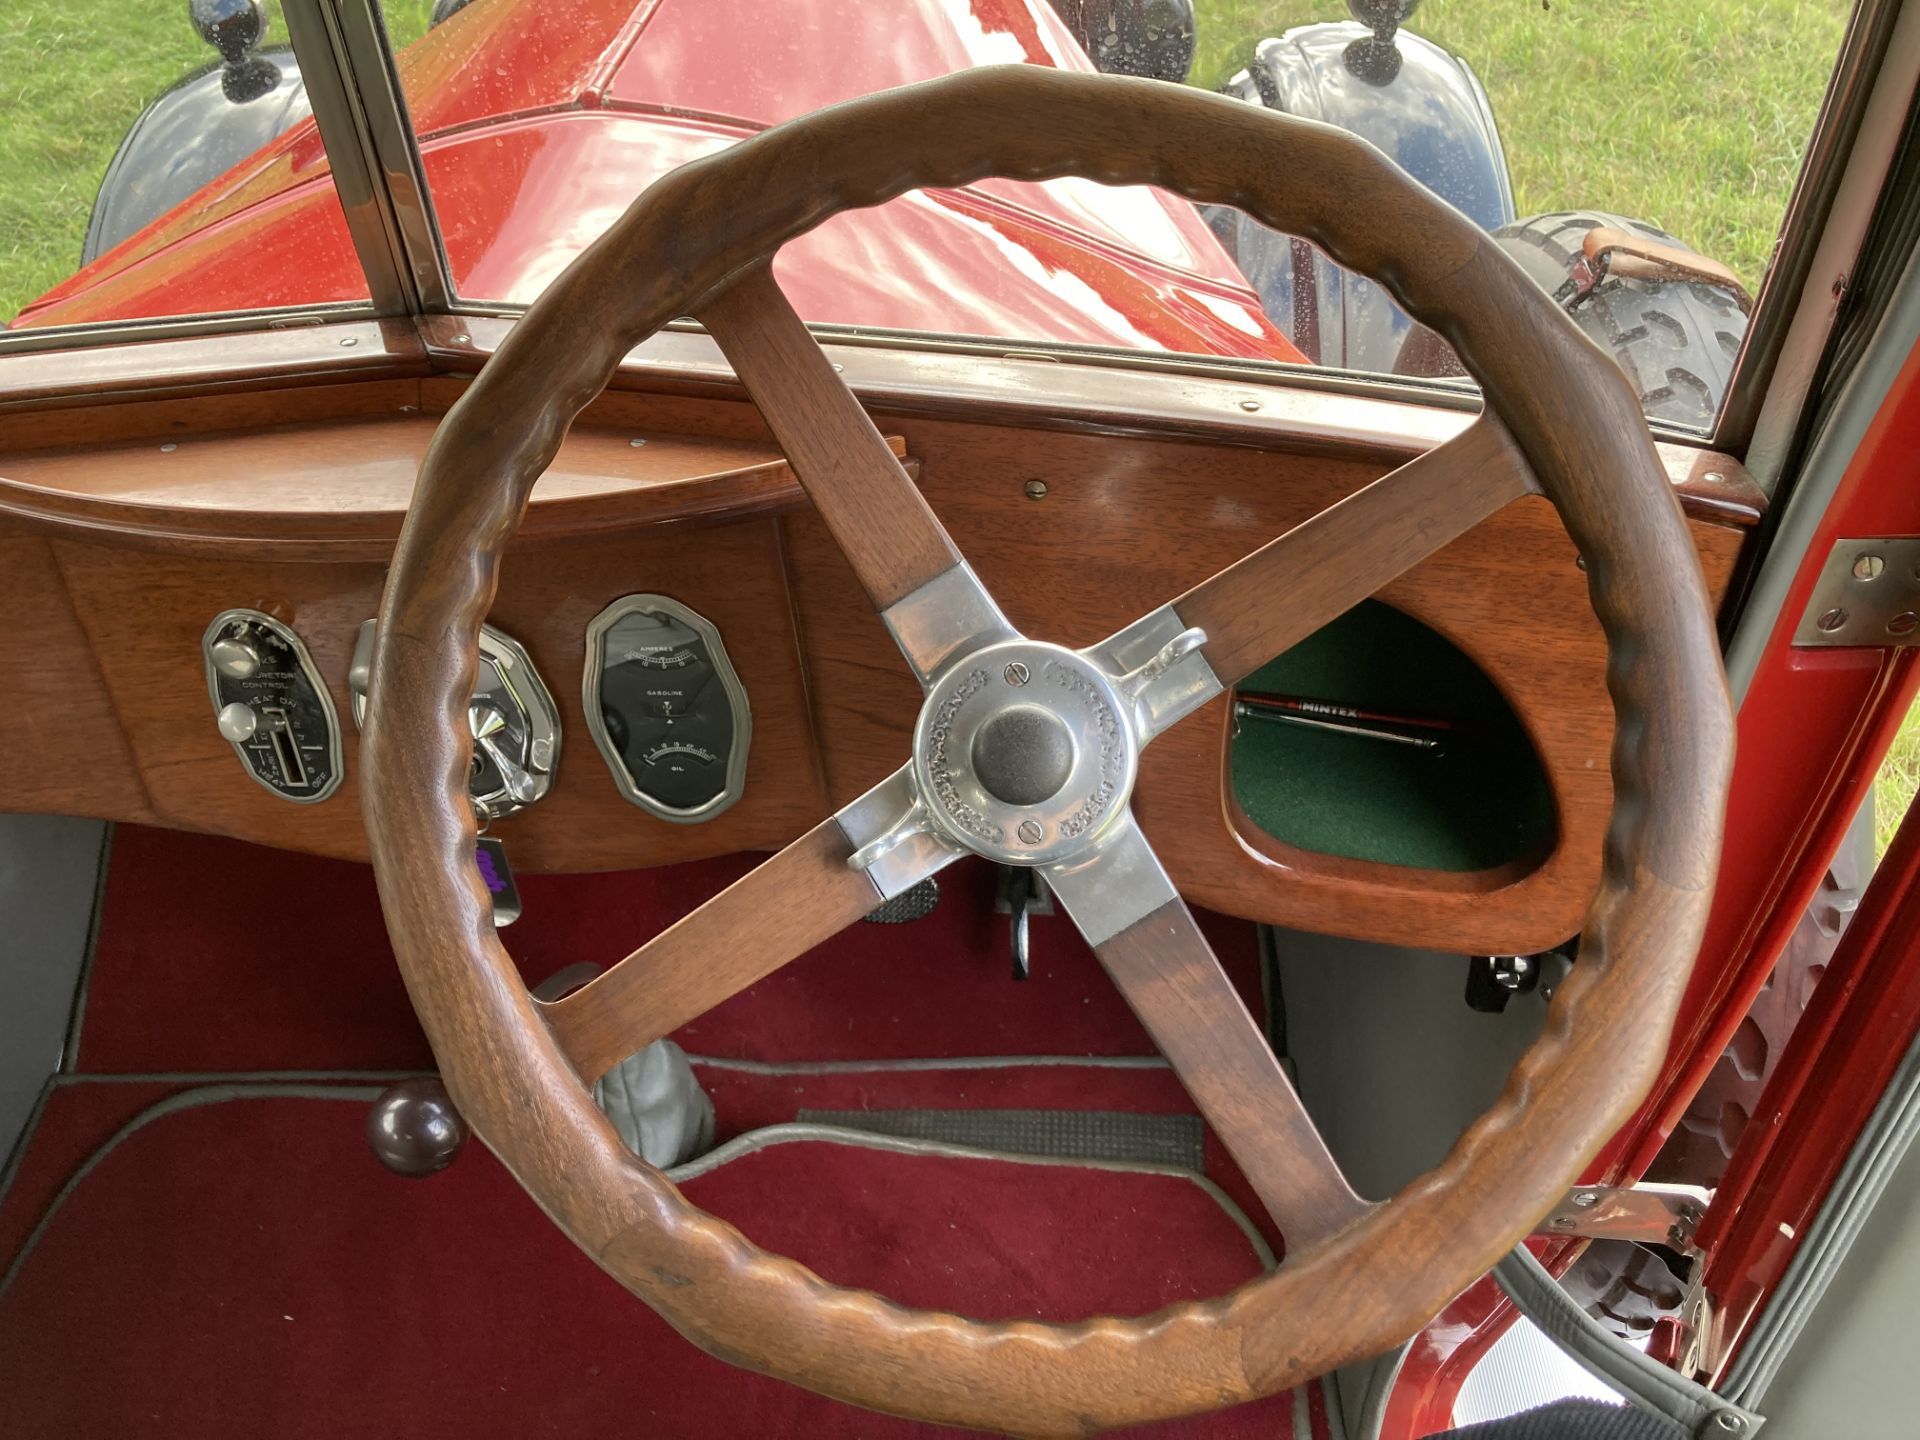 HISTORIC VEHICLE - 1924 BUICK McLAUGHLIN LIMOUSINE - Petrol - Red/Black - Blue/grey cloth interior. - Image 16 of 30